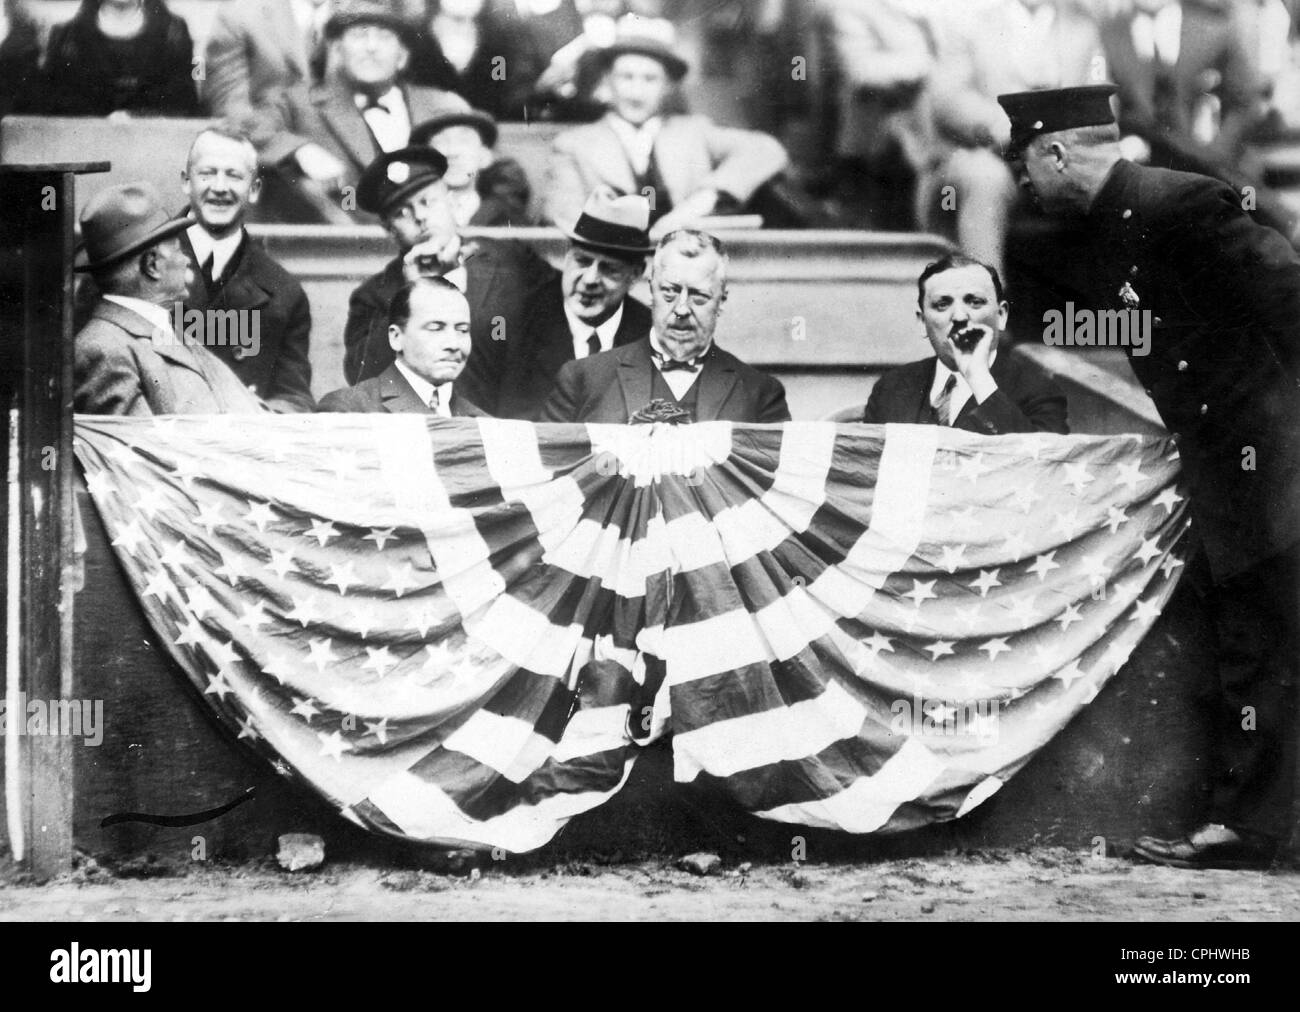 Dr. Eckener and Captain Lehmann as honored guests in the USA, 1924 Stock Photo